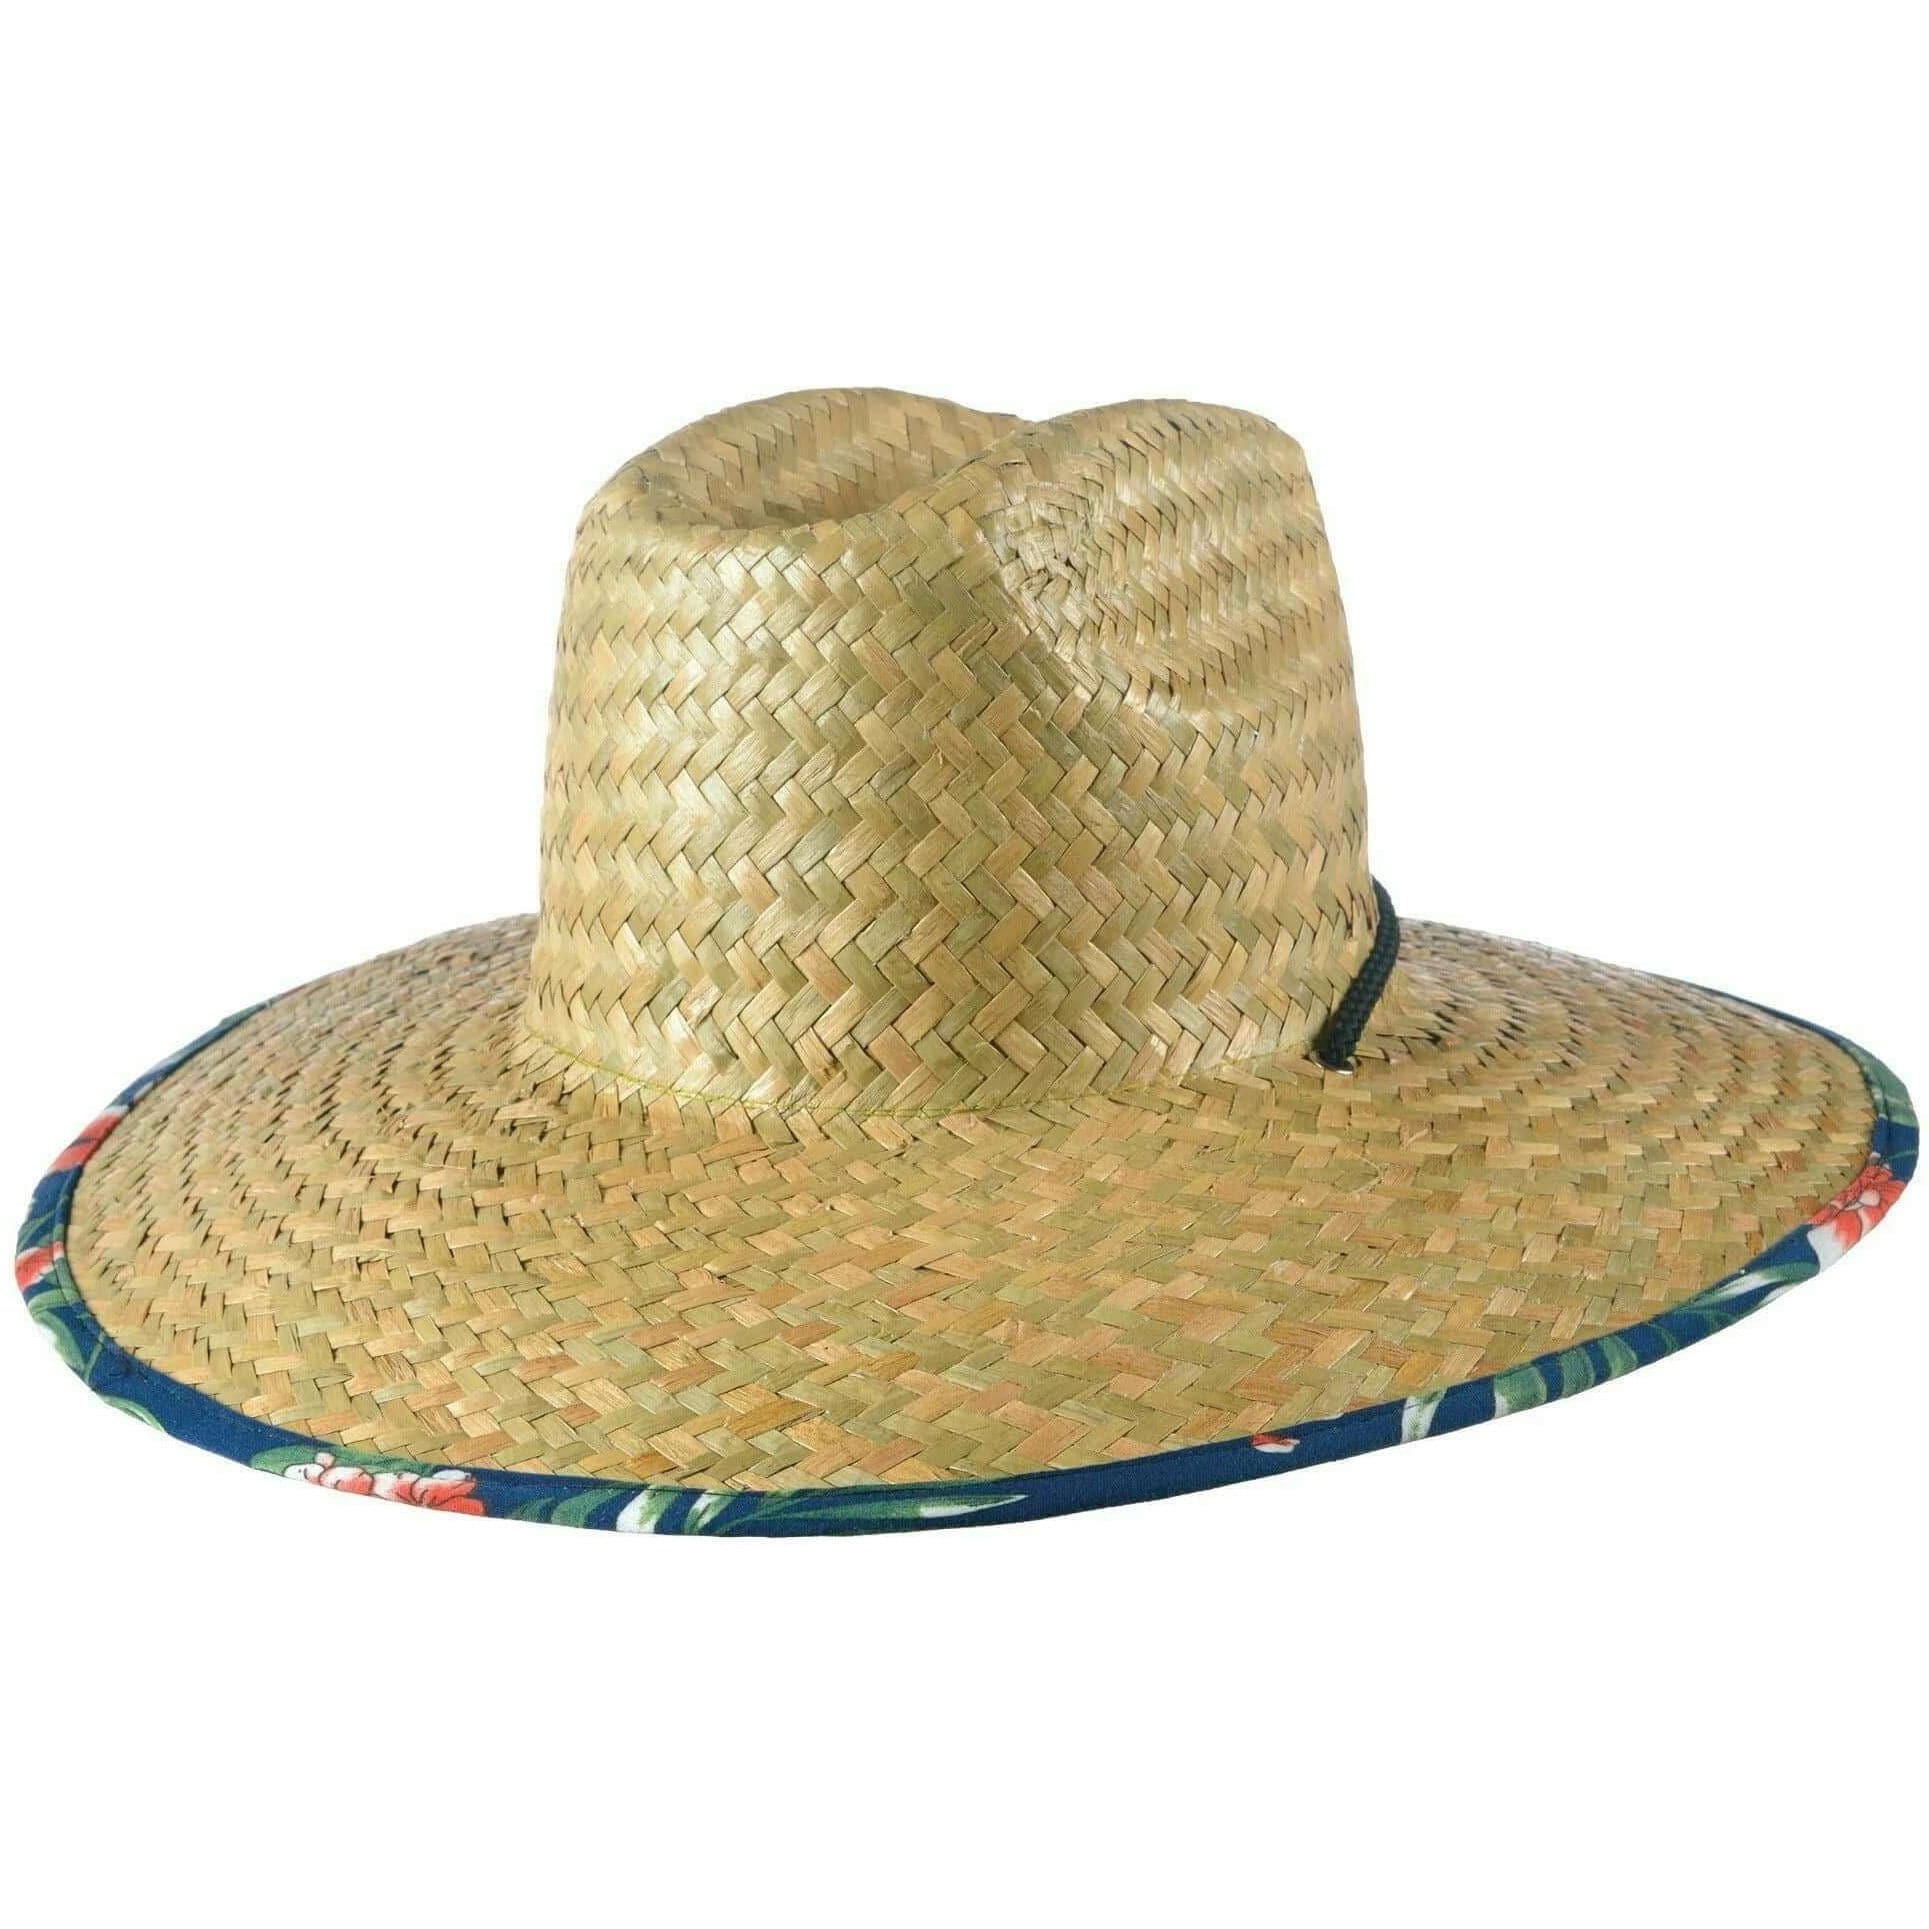 Amscan COSTUMES: HATS Surfer Straw Hat